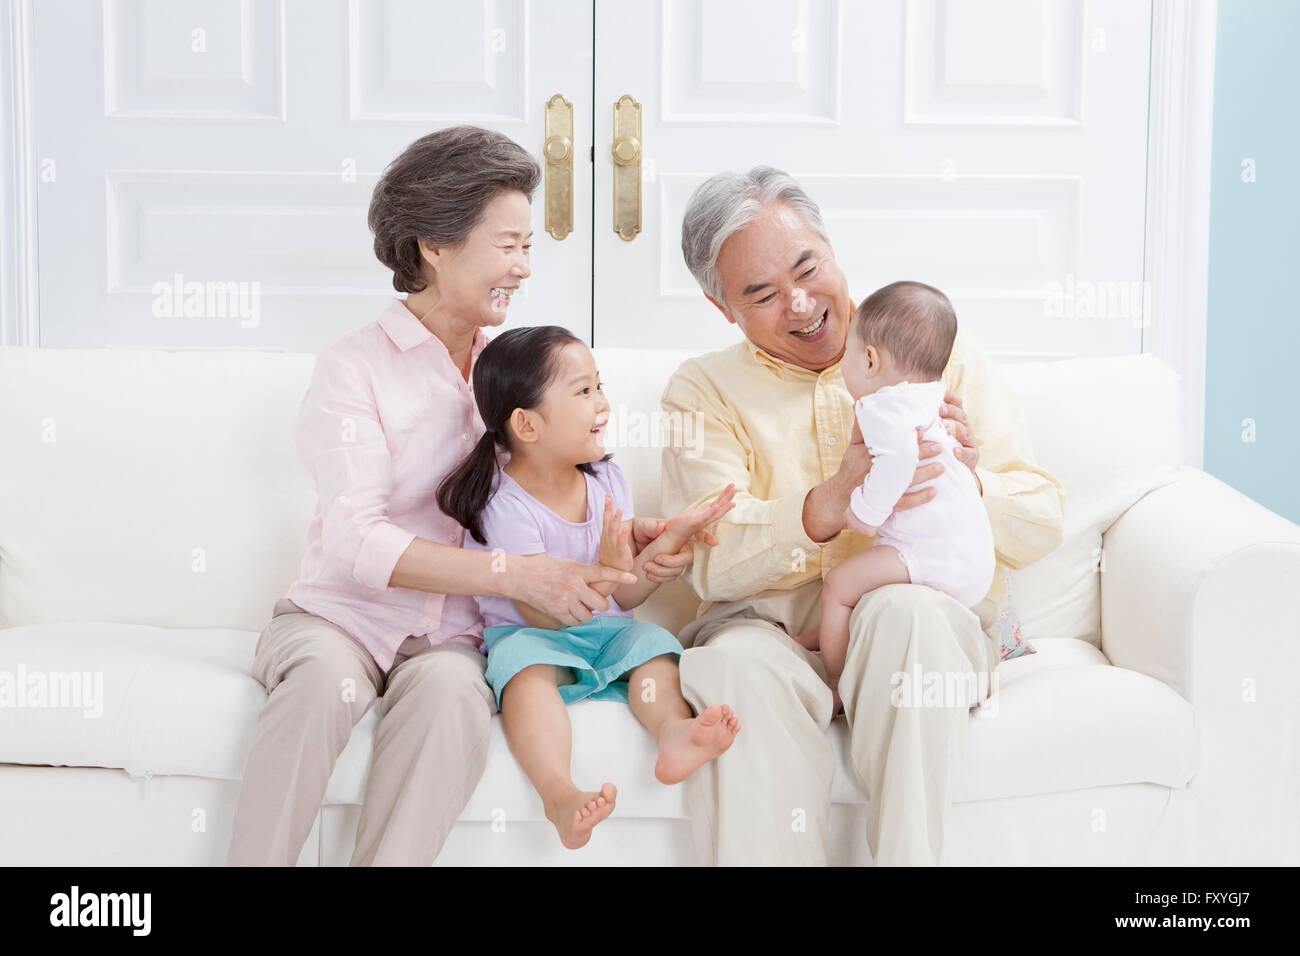 Grandparents being happy with their grandchildren all seated on a couch and smiling Stock Photo